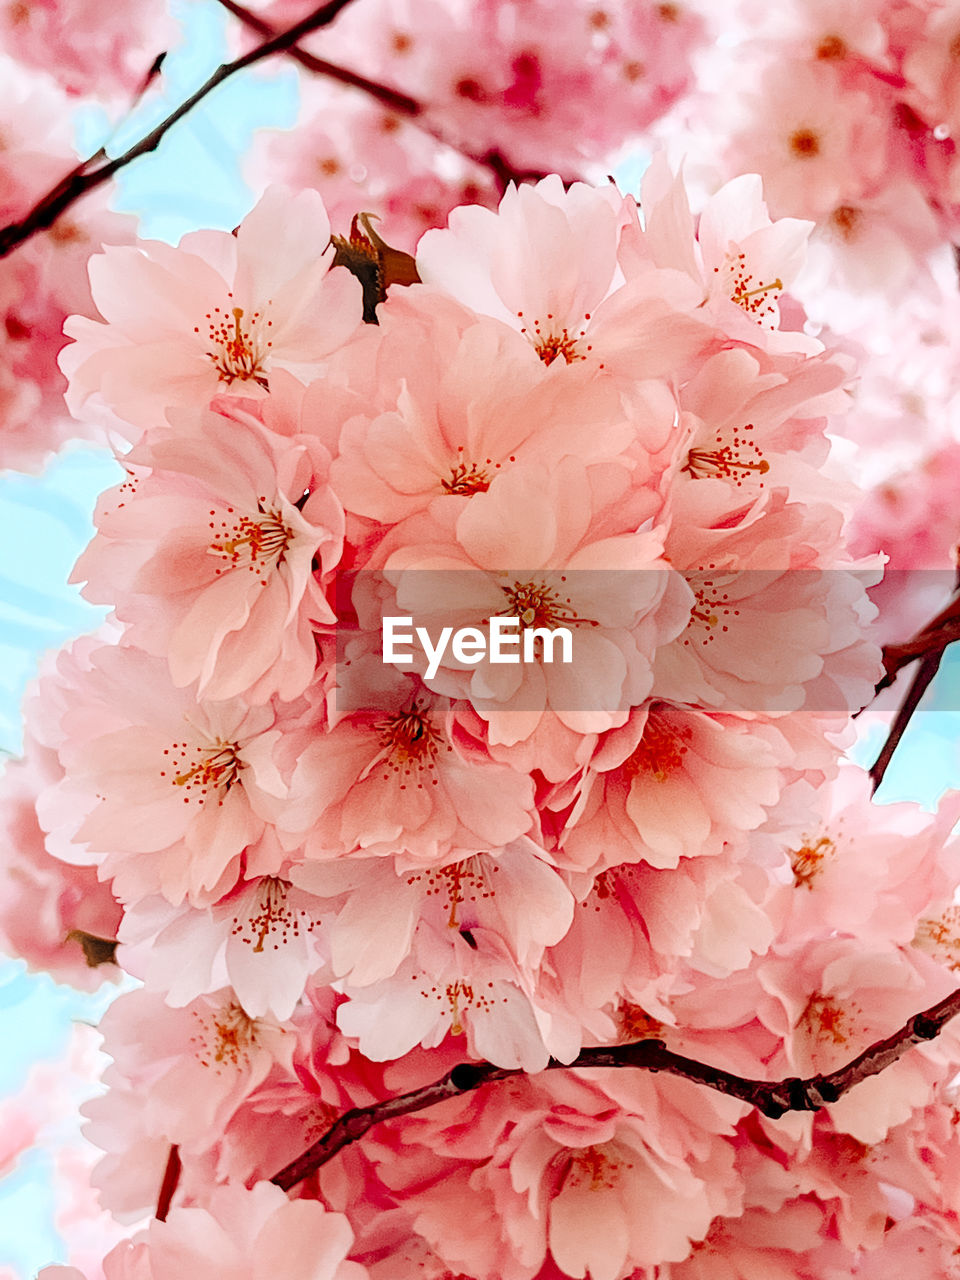 plant, flower, flowering plant, pink, beauty in nature, fragility, blossom, freshness, springtime, growth, cherry blossom, tree, cherry, nature, branch, close-up, petal, spring, no people, inflorescence, flower head, outdoors, cherry tree, day, produce, pollen, botany, focus on foreground, low angle view, backgrounds, twig, food, plum blossom, stamen